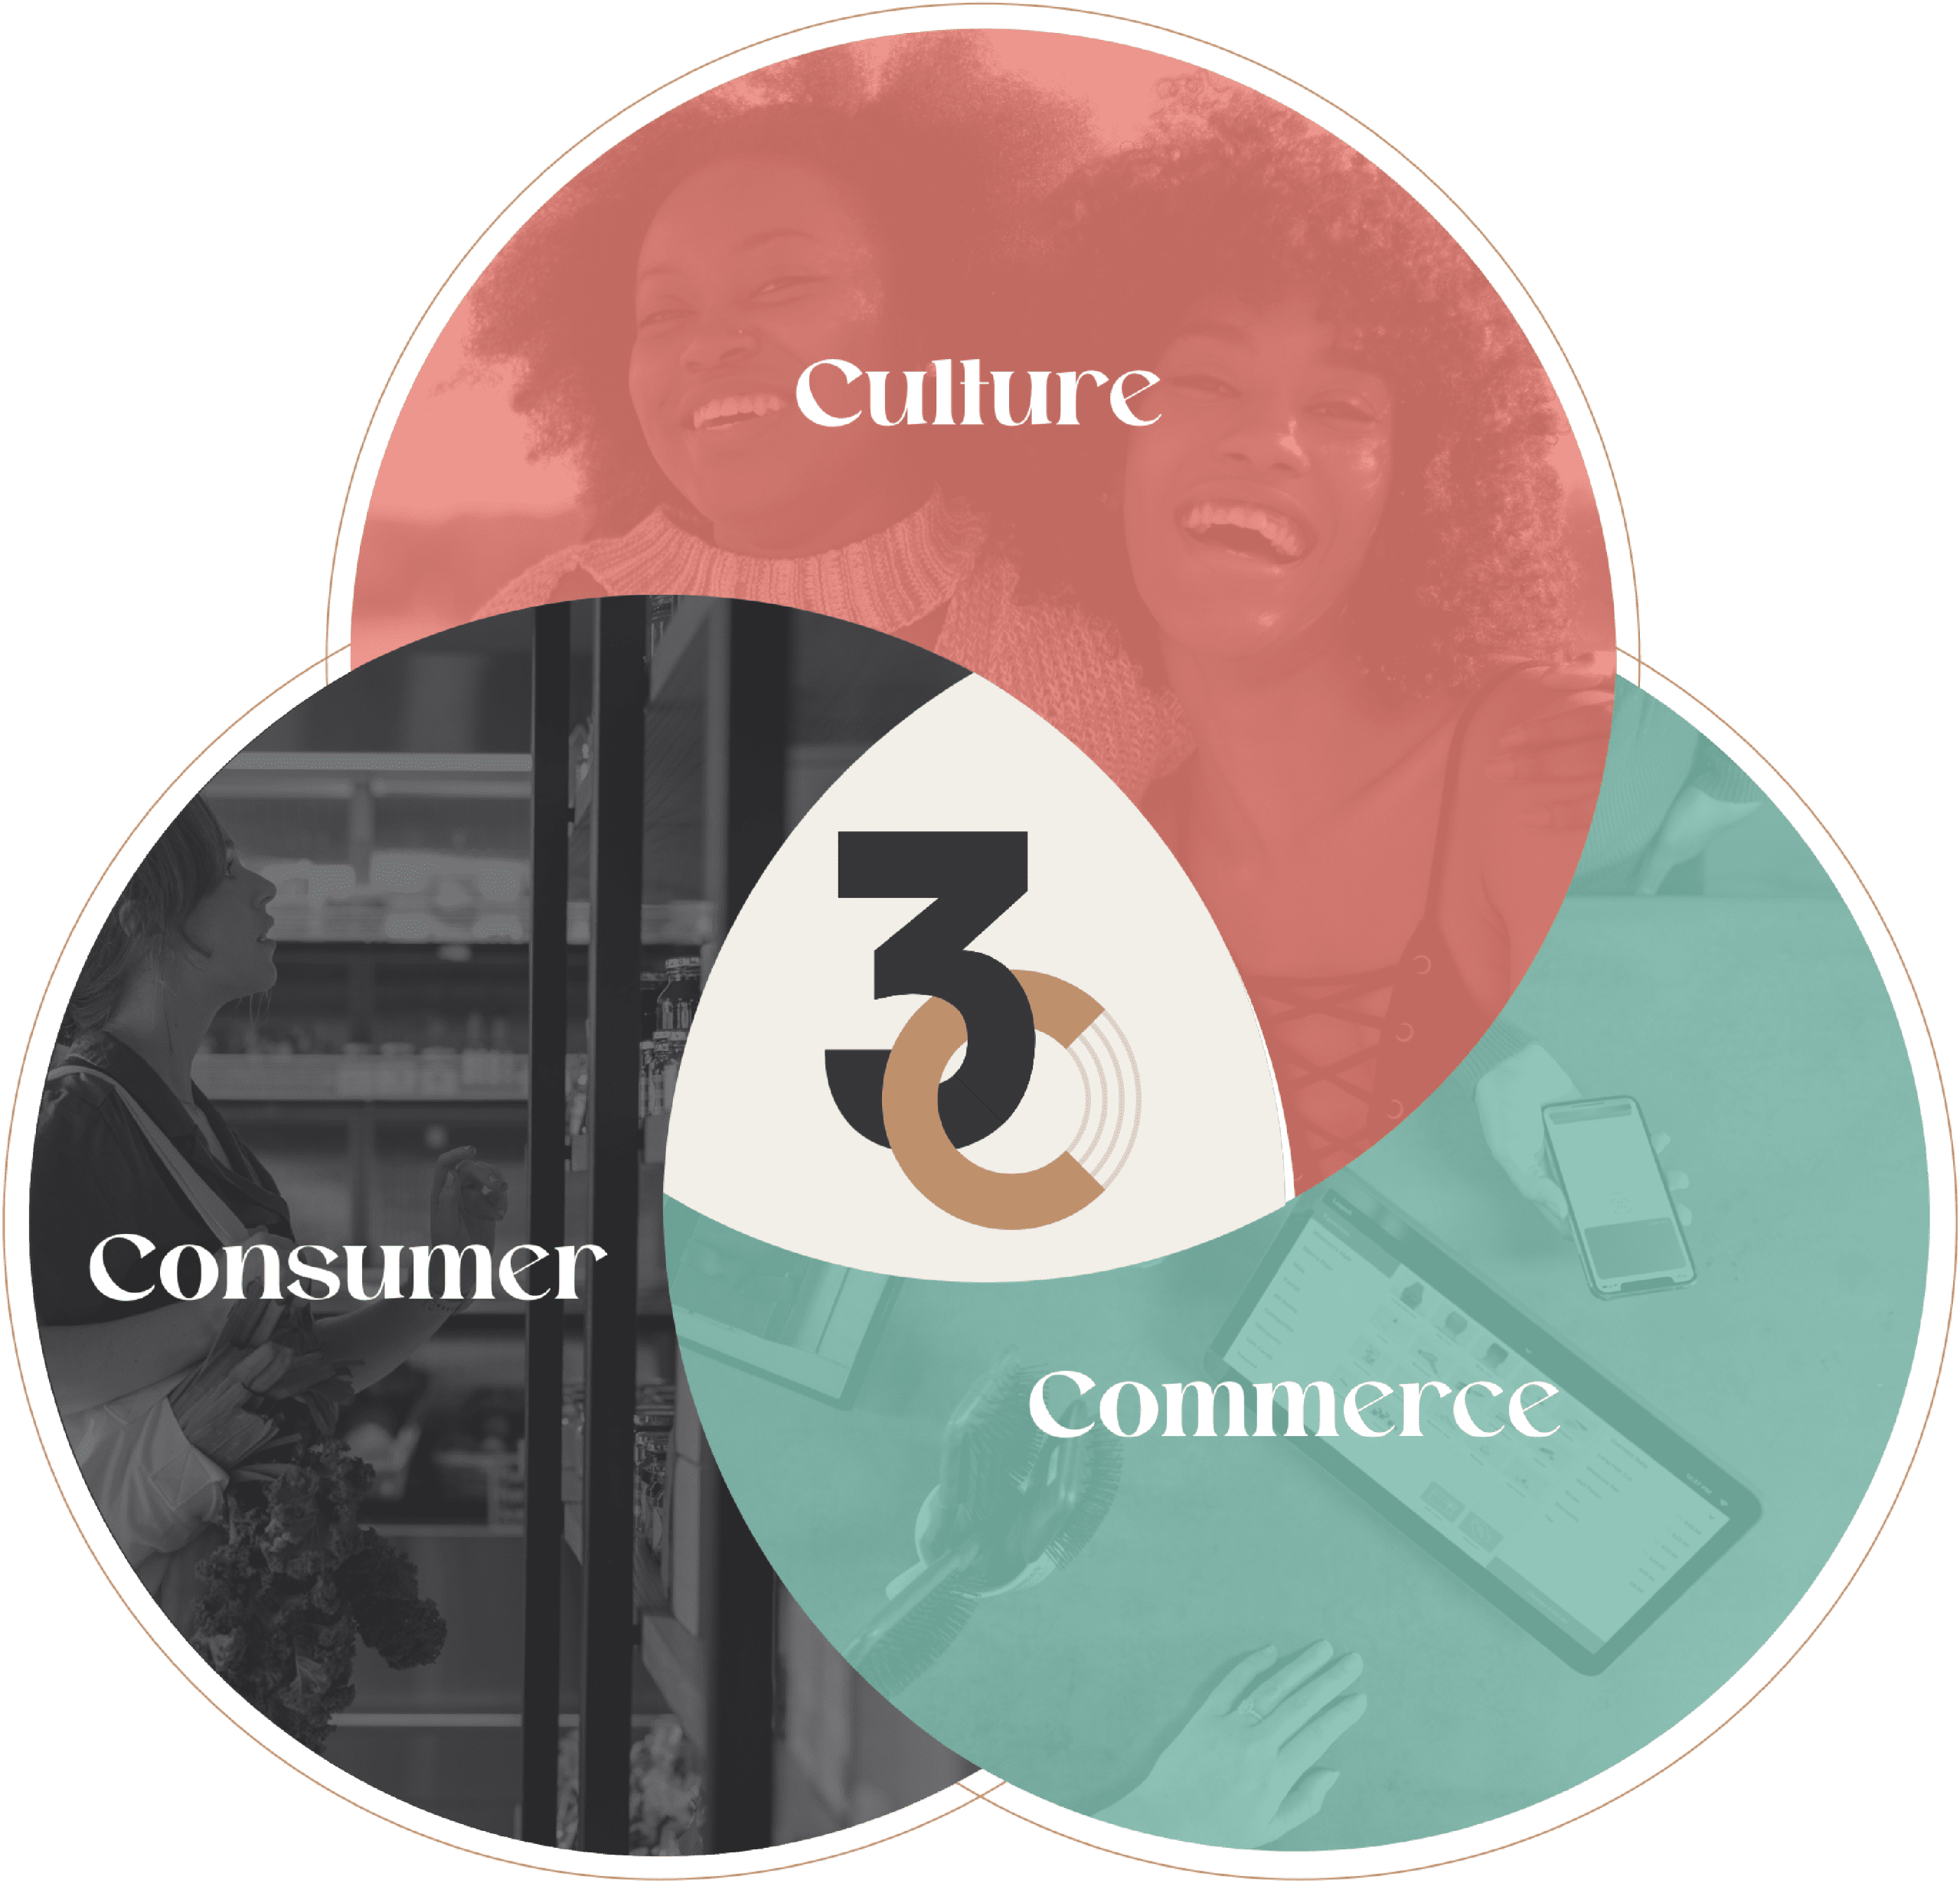 Culture, Consumer, and Commerce